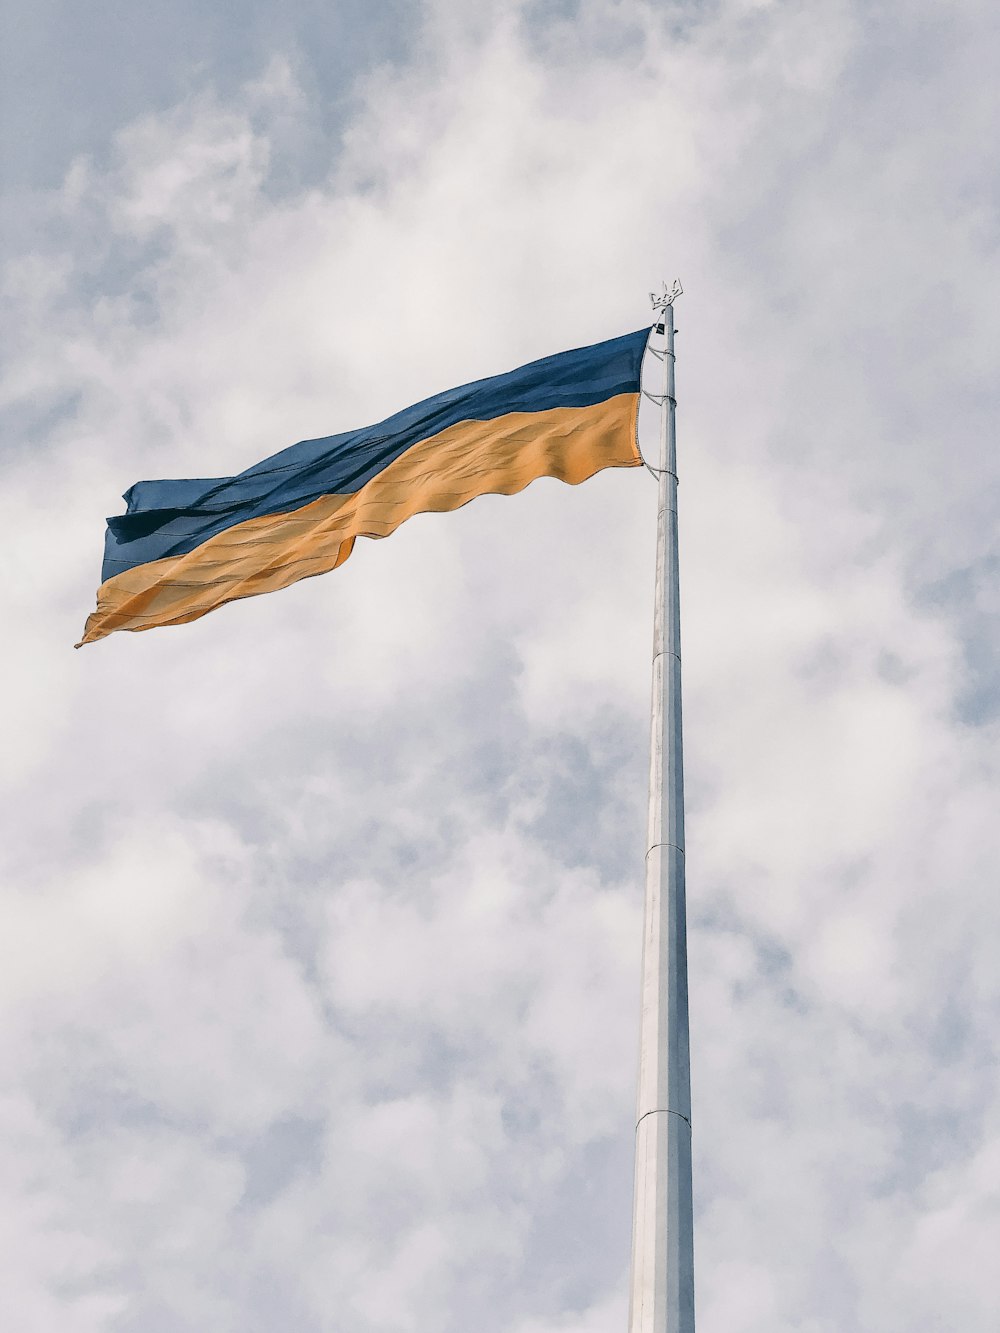 a flag flying high in the sky on a cloudy day